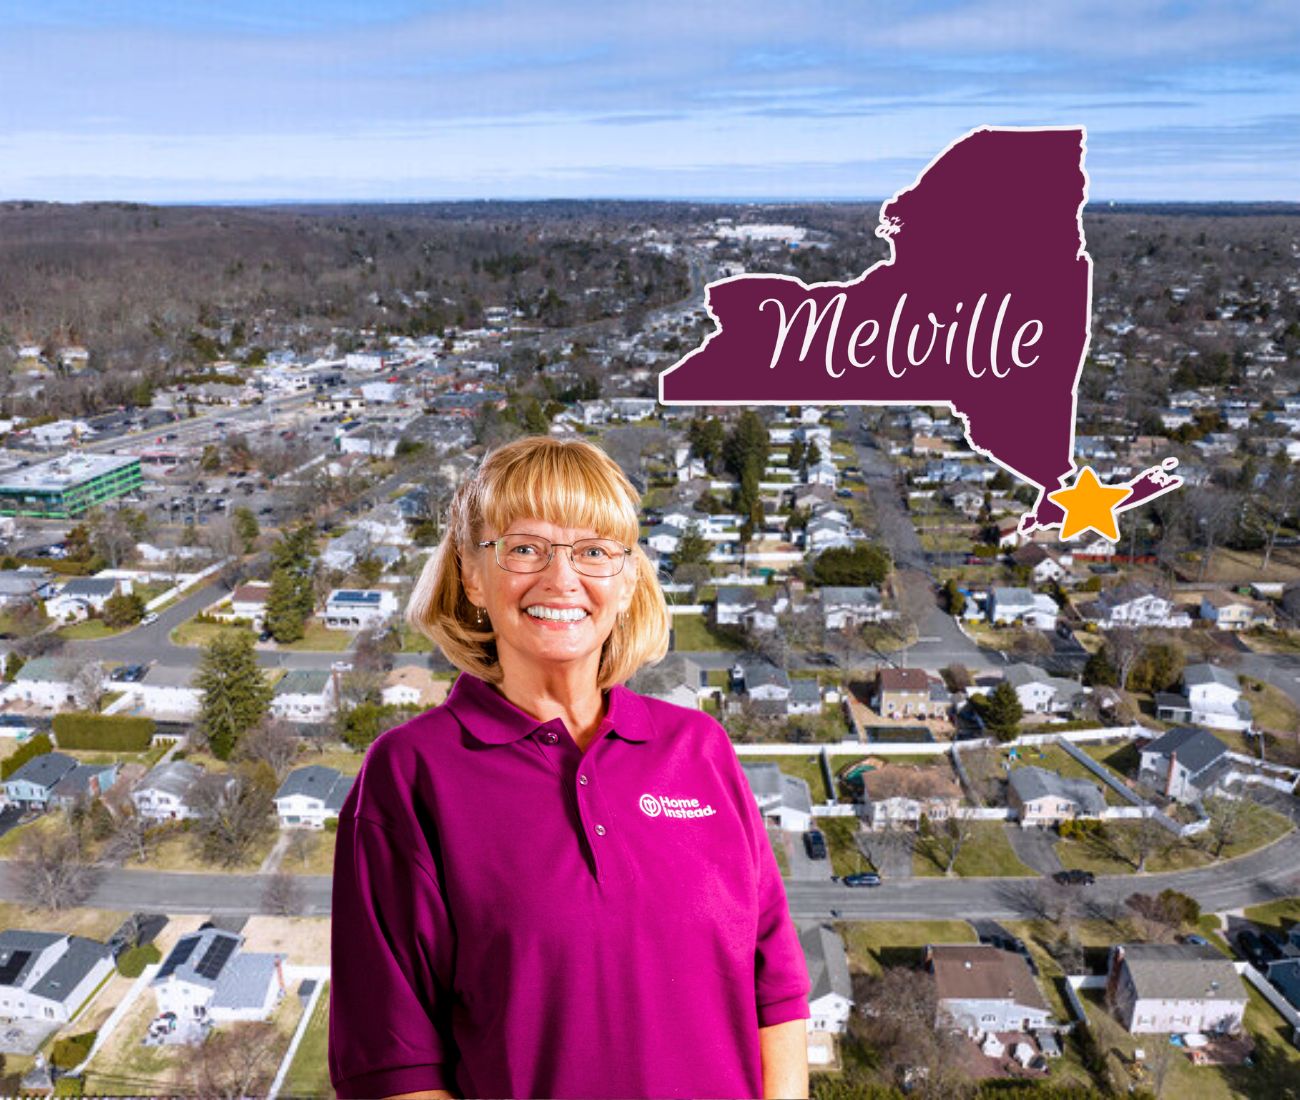 Home Instead caregiver with Melville, New York in the background